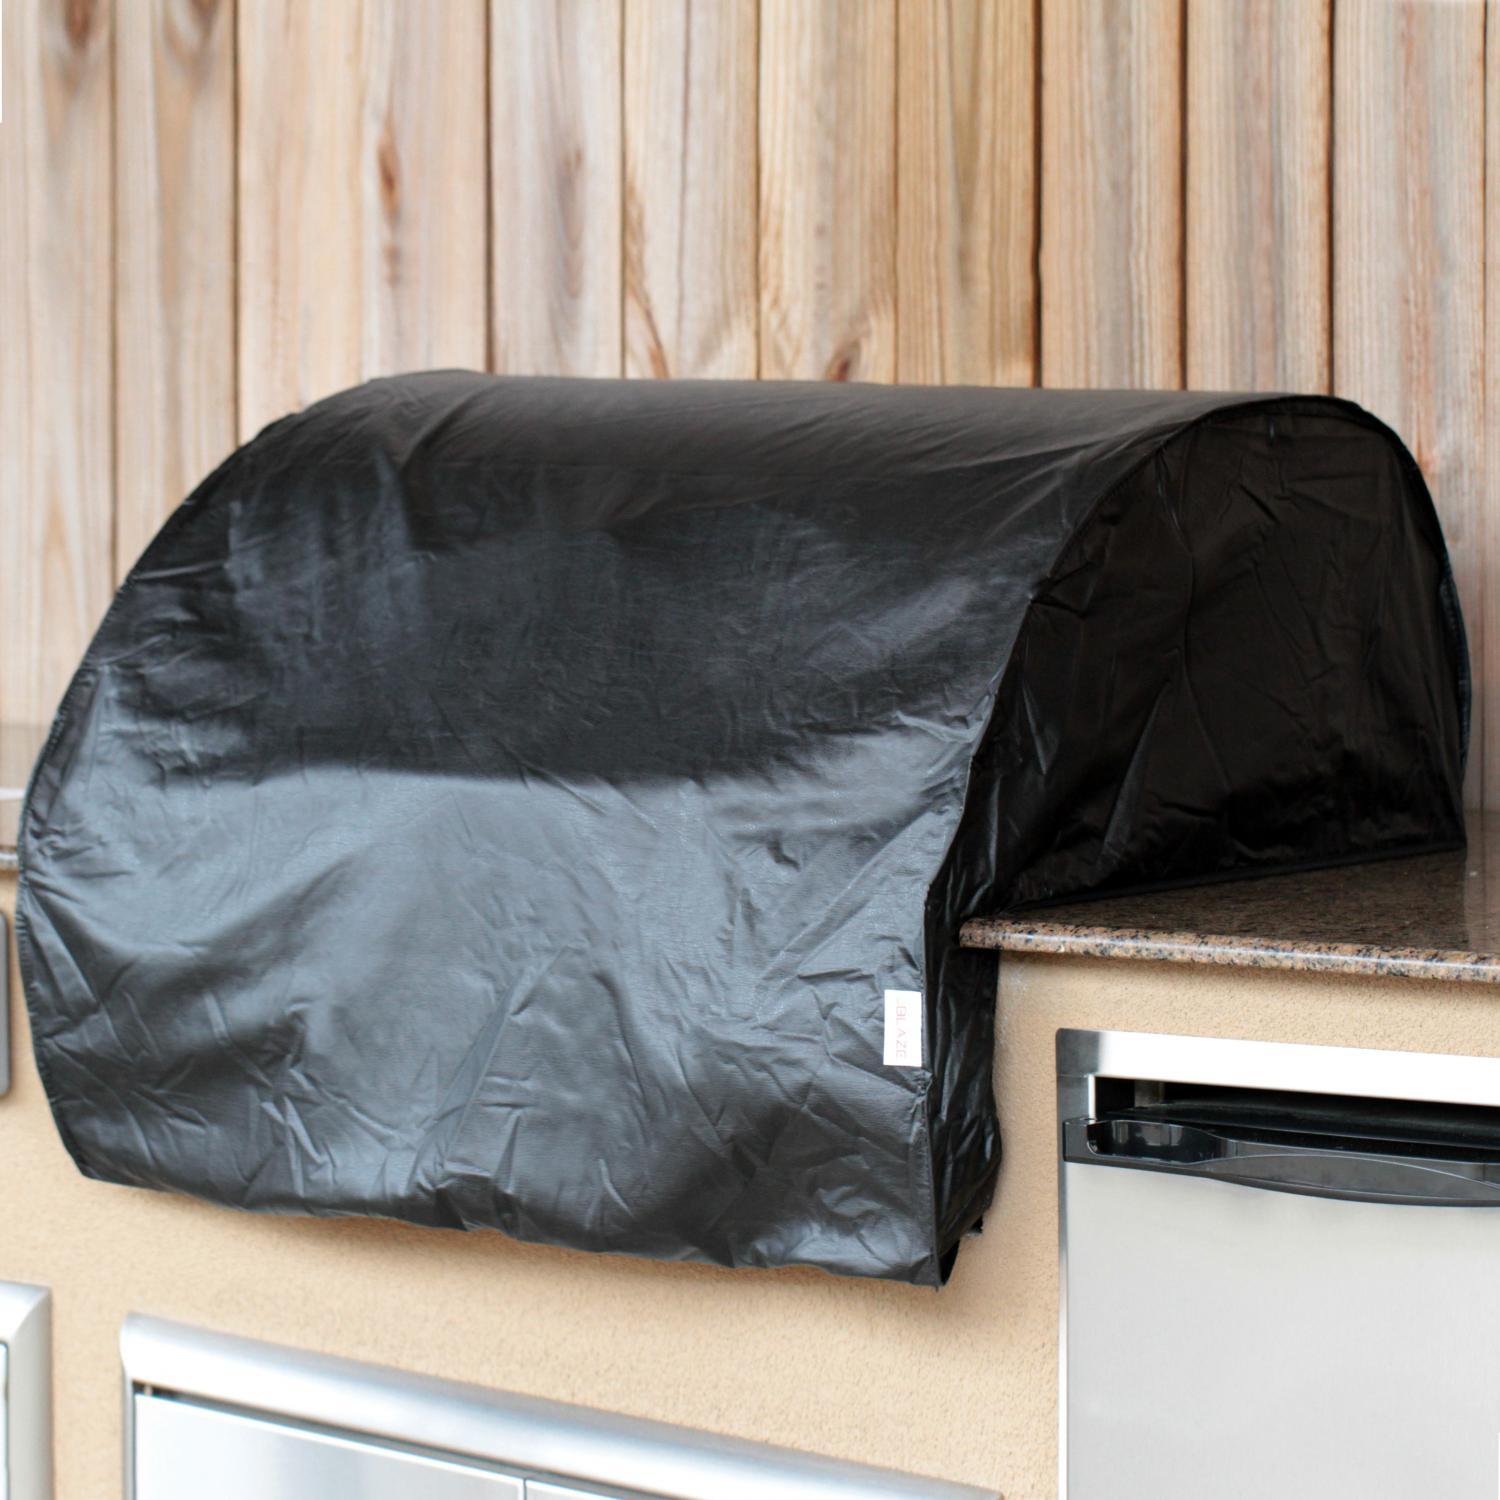 Blaze Blaze Accessories 34" Built In Grill Cover for 34" 3 Burner PRO Built In Grill Head